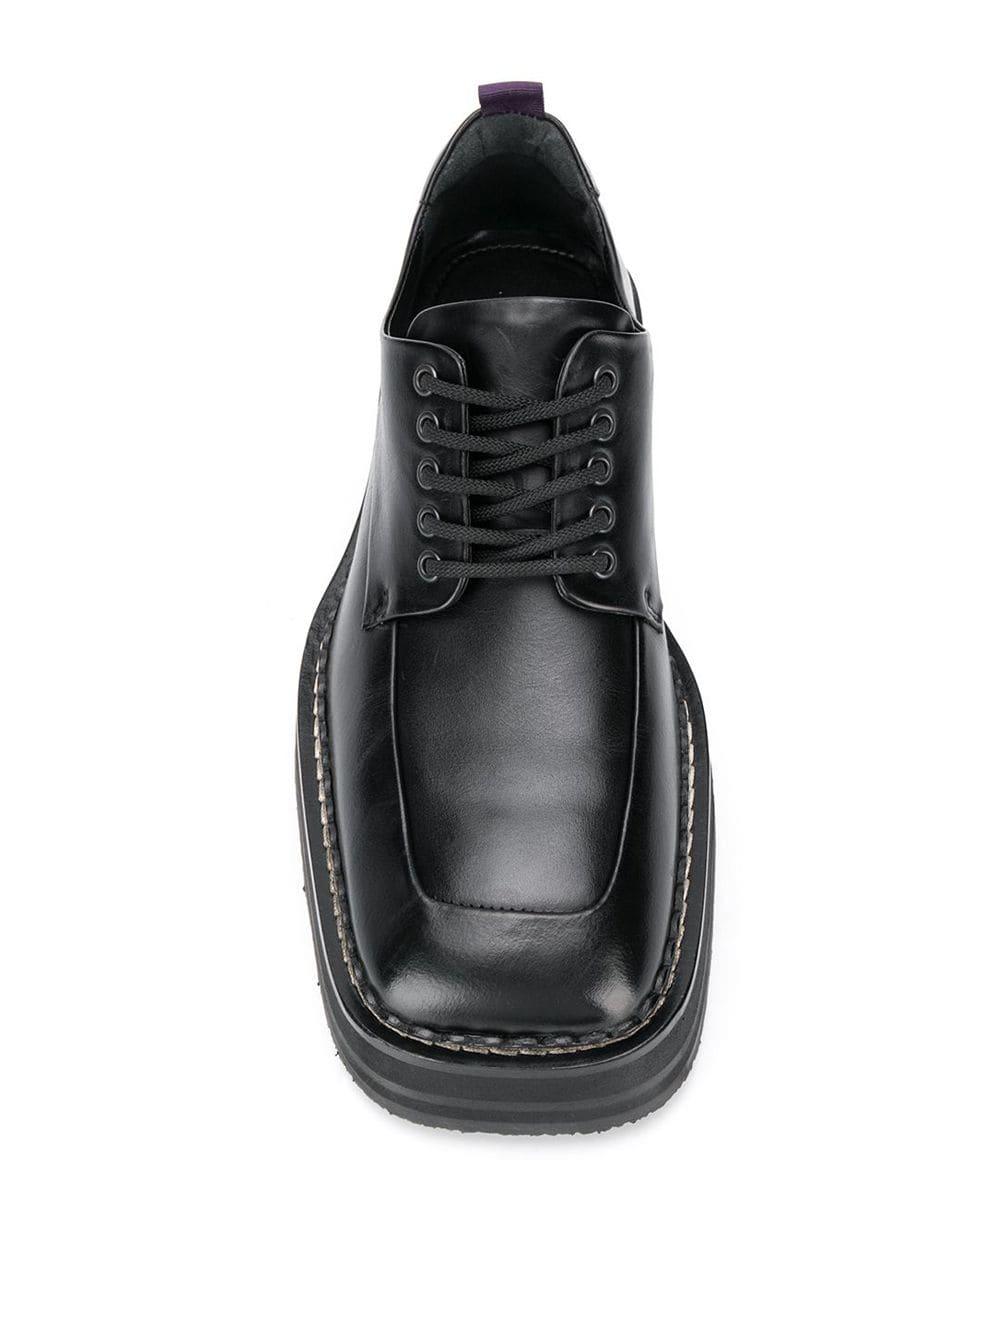 Eytys Leather Phoenix Derby Shoes in Black for Men - Lyst